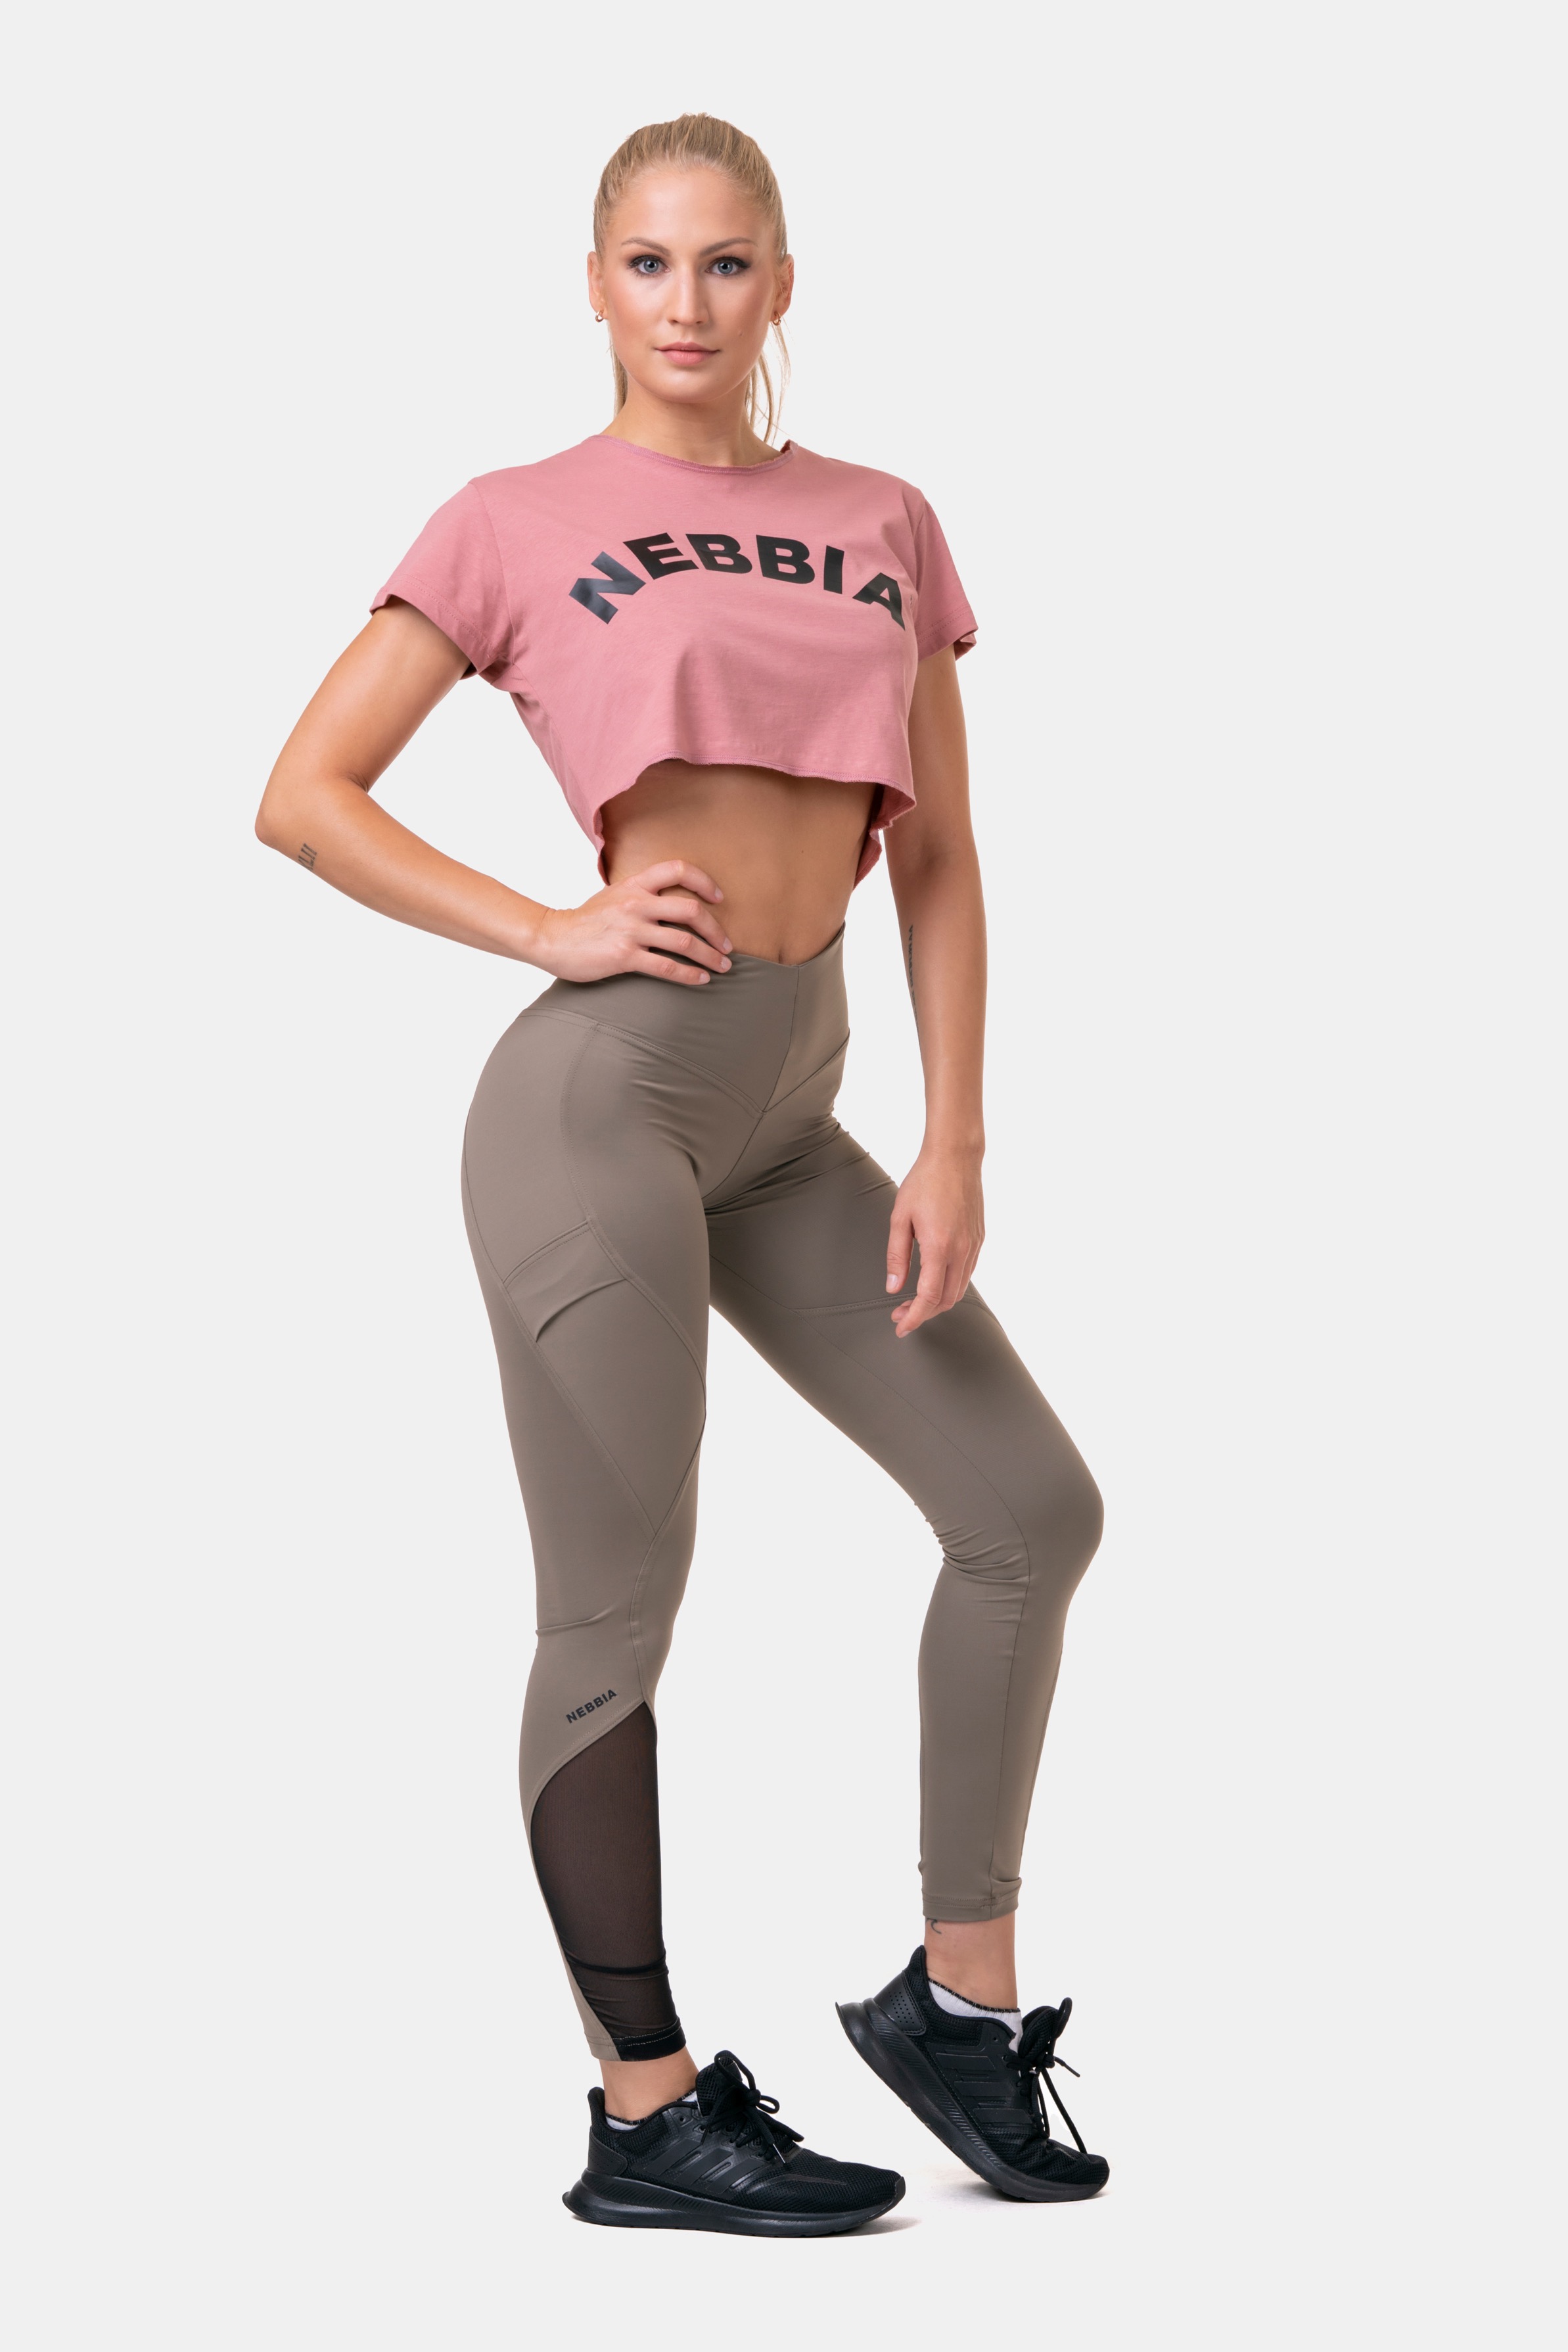 nebbia-fit-and-sporty-laza-crop-top-583-old-rose